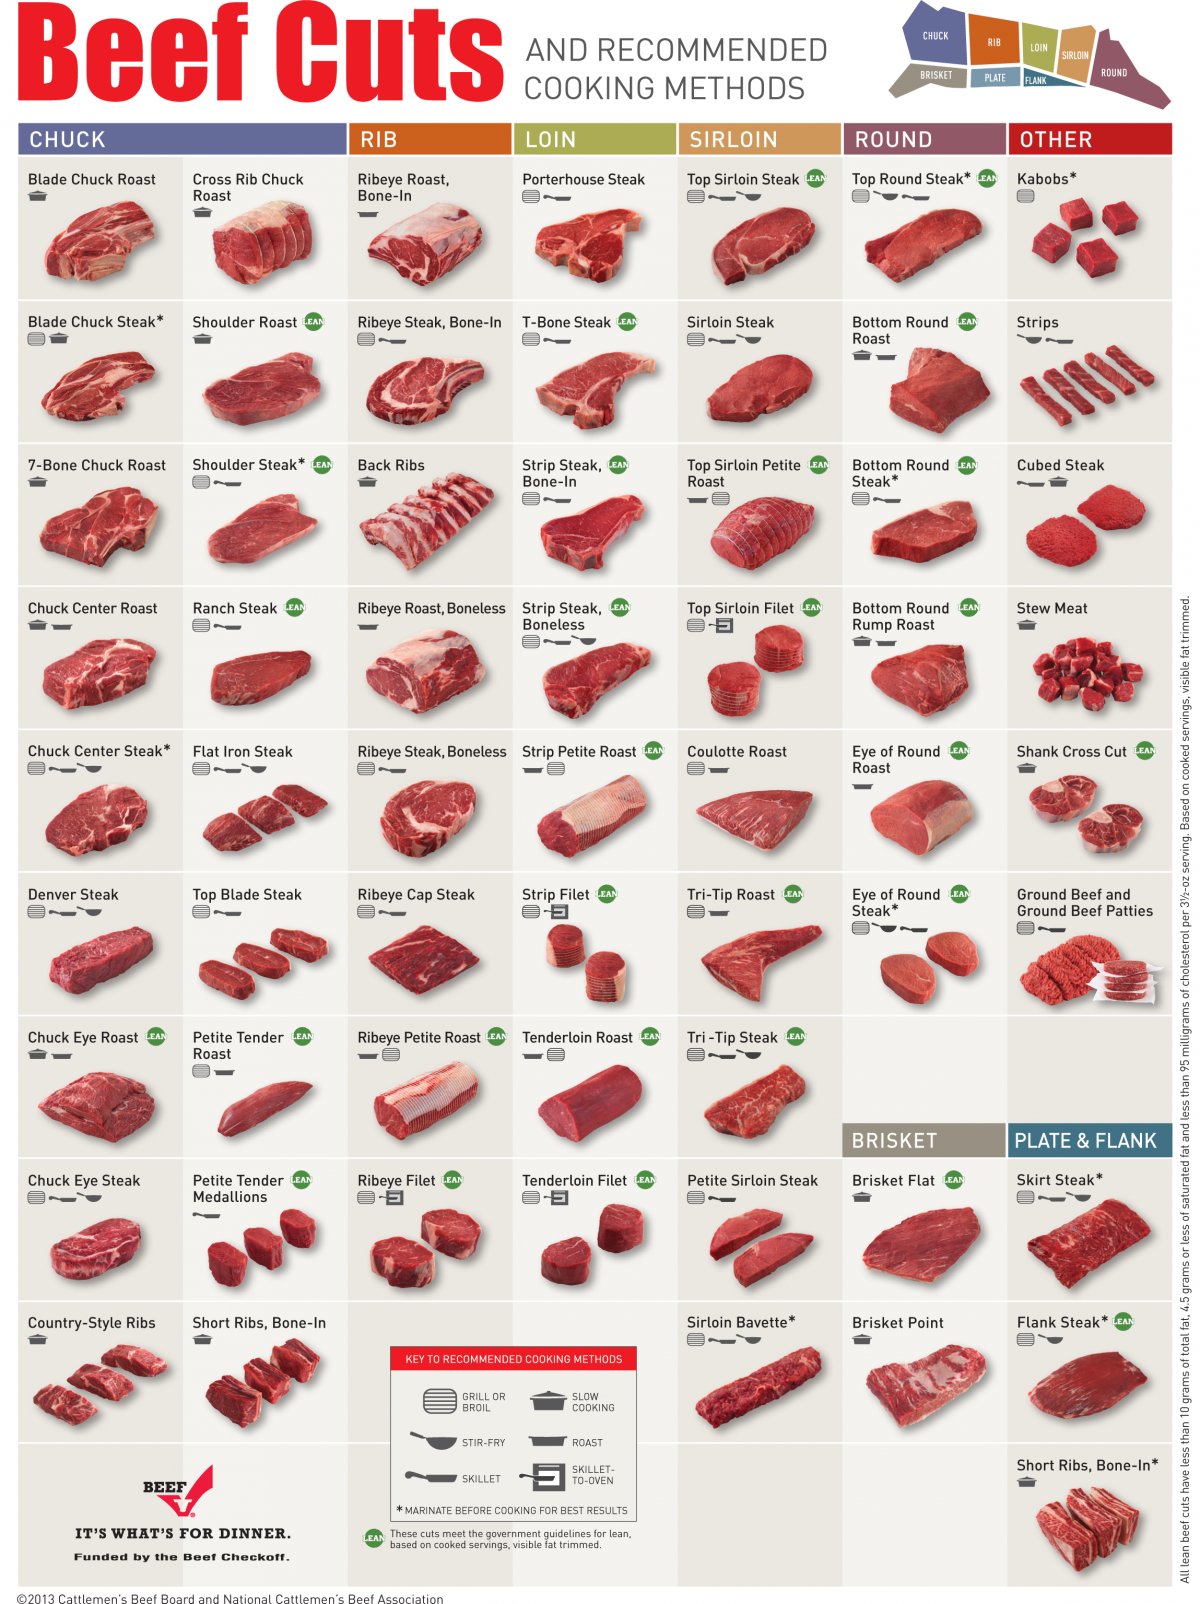 Beef Cuts and Recommended Cooking Methods | TFE Times